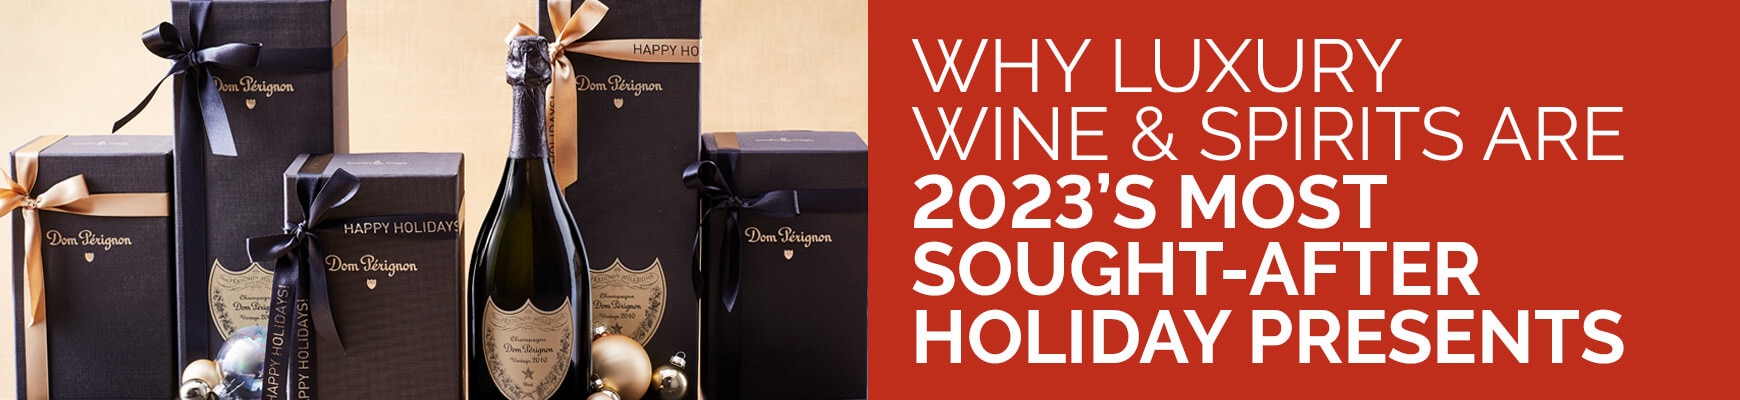 Why Luxury Wine & Spirits are 2023's Most Sought-After Holiday Presents